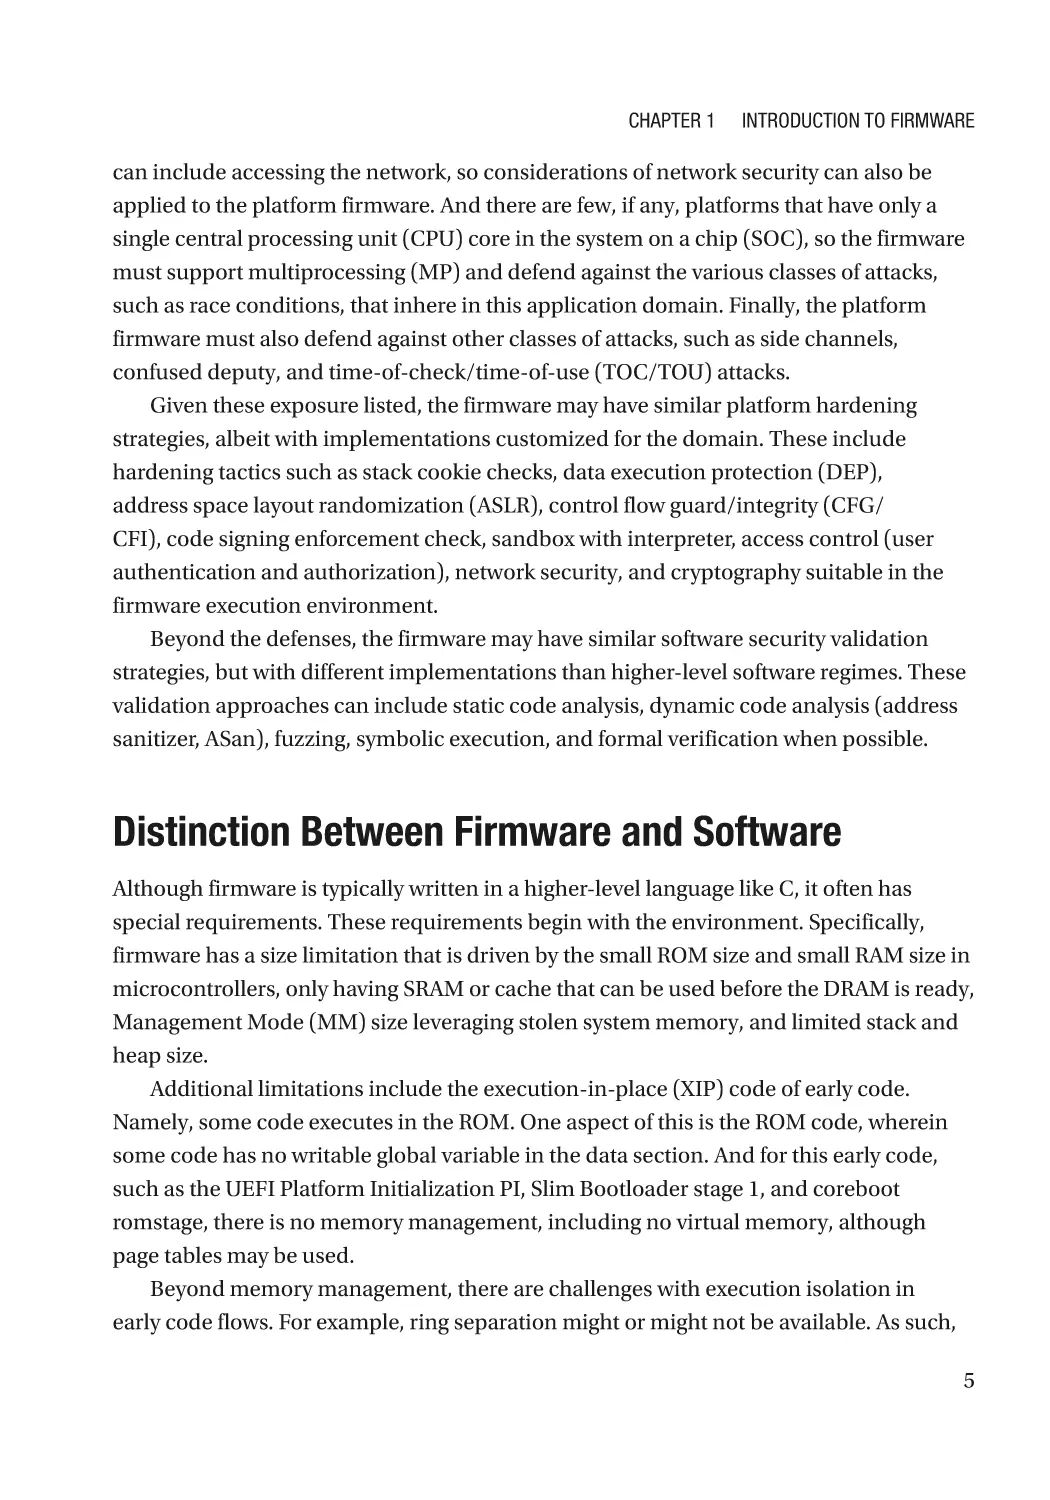 Distinction Between Firmware and Software